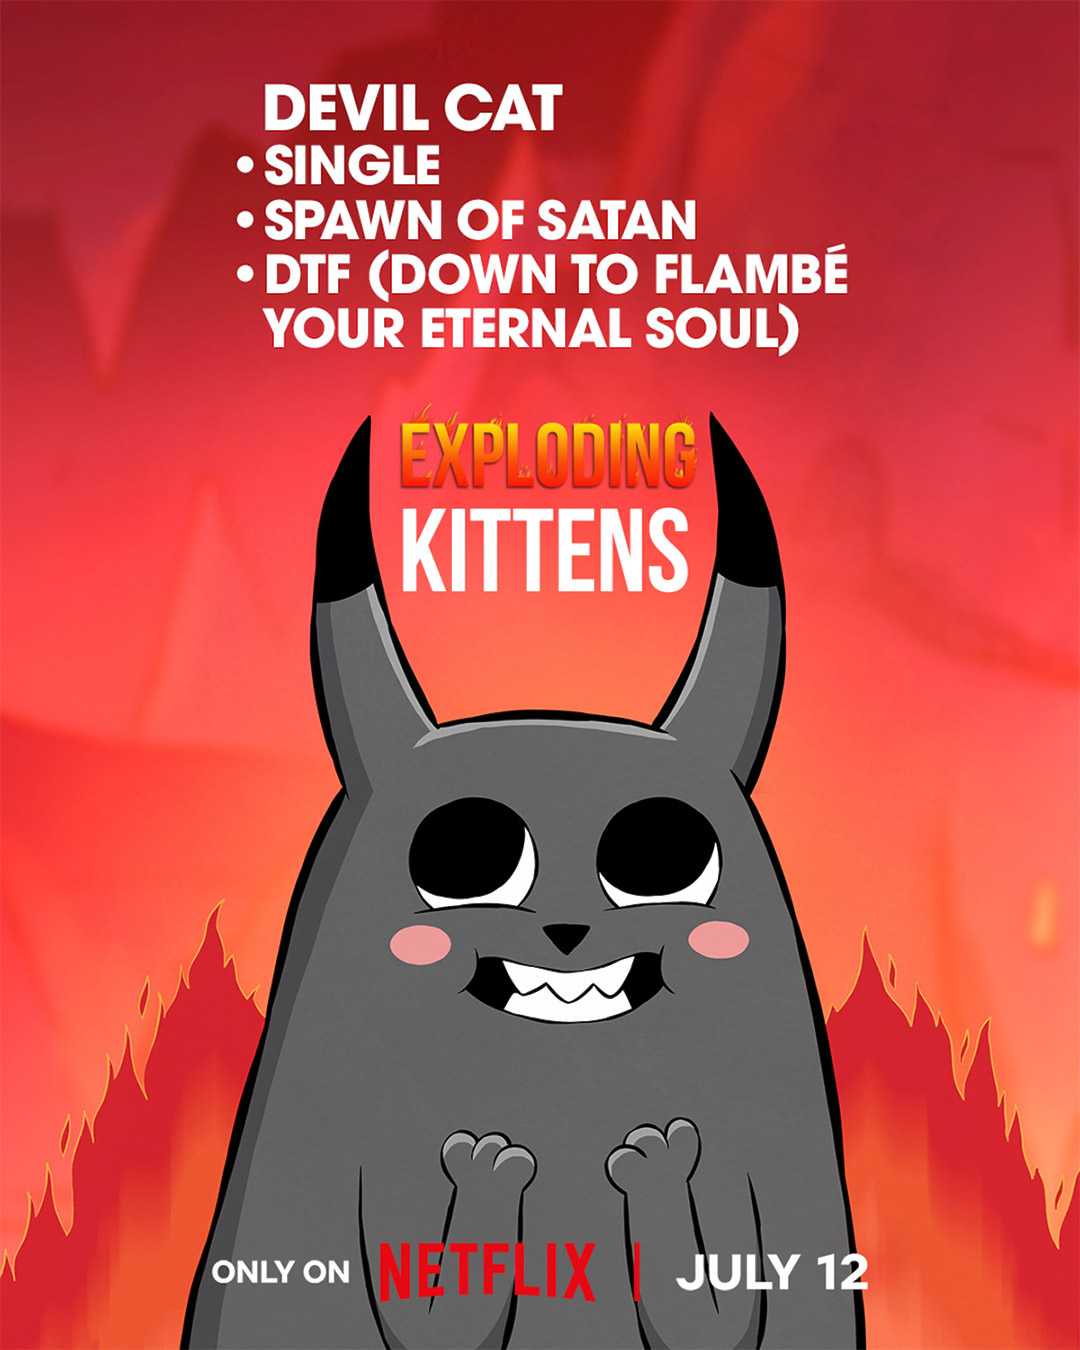 a cartoon of a devil cat is shown for a Netflix promo.